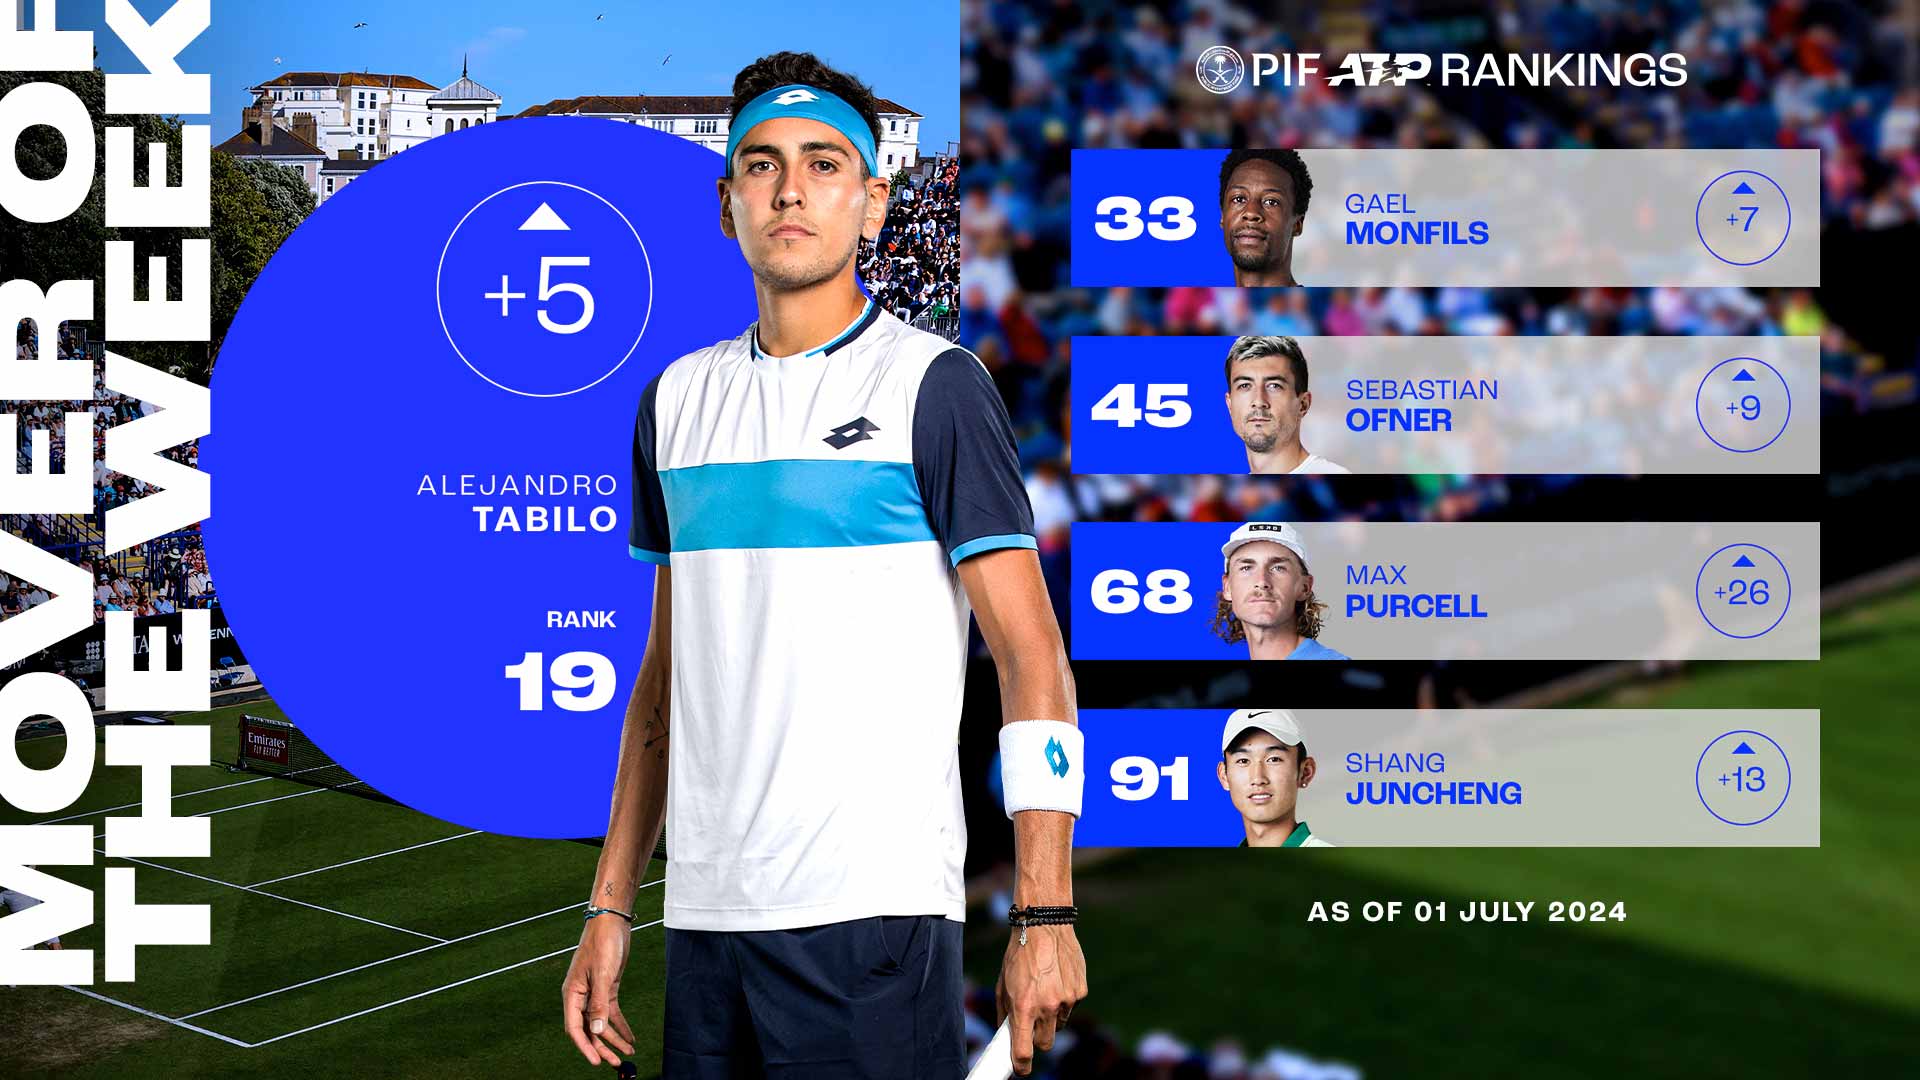 Alejandro Tabilo has risen to a career-high No. 19 in the PIF ATP Rankings.